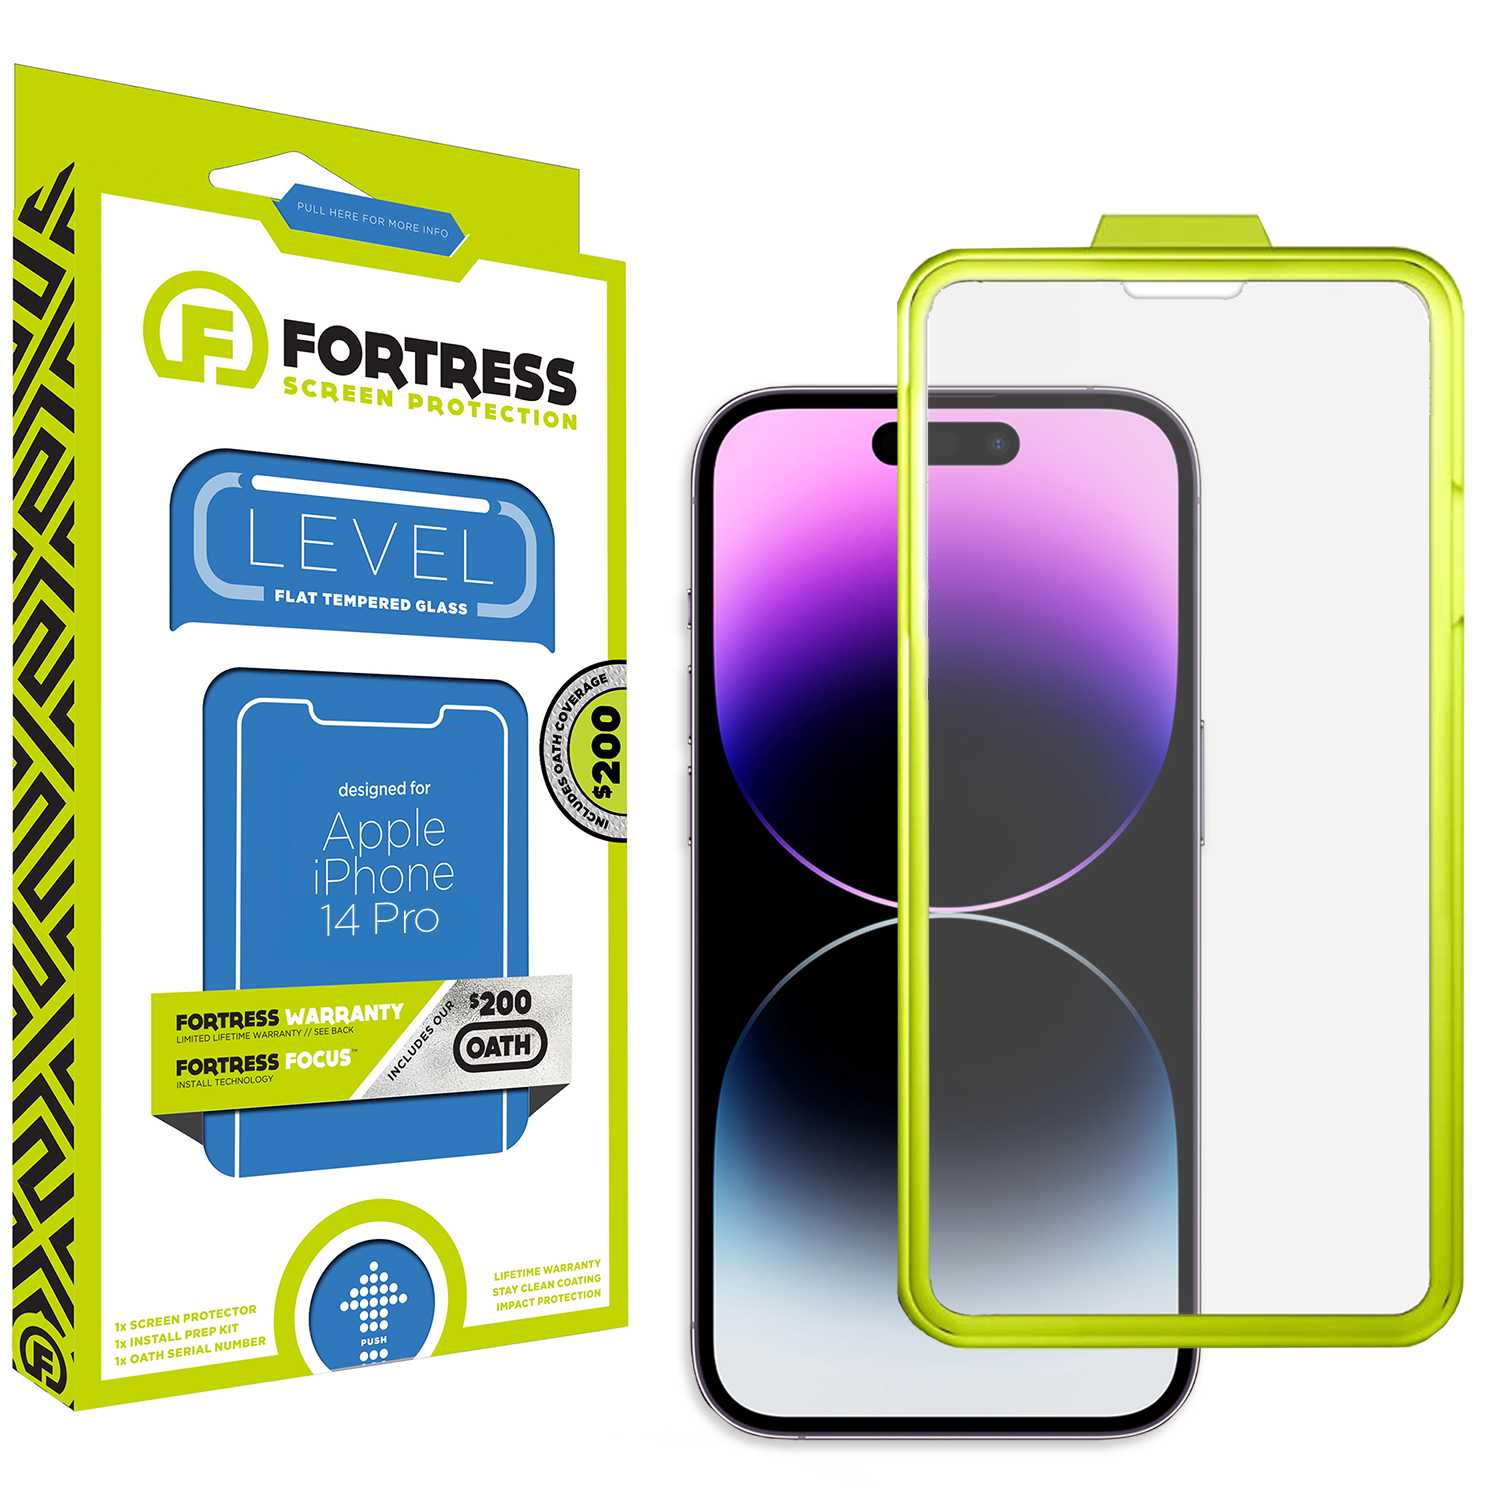 Fortress iPhone 14 Pro Screen Protector $200CoverageInstallTool Scooch Screen Protector